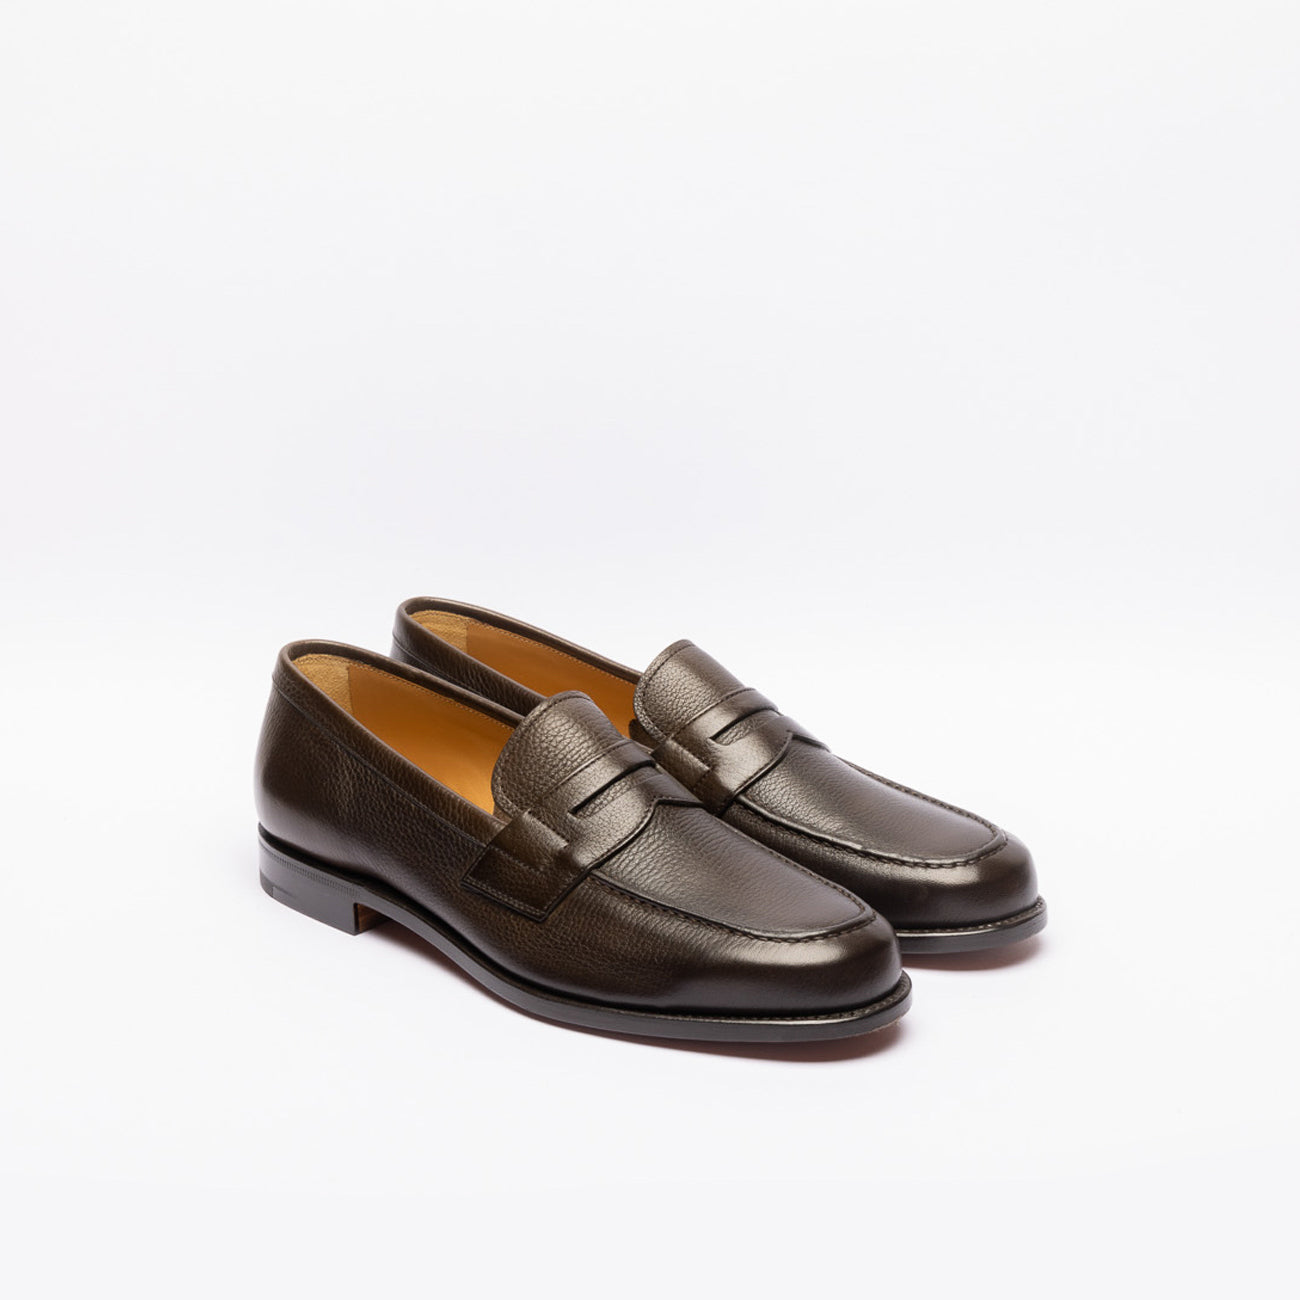 Church's Heswall penny loafers in brown hammered leather (Ebony soft grain)